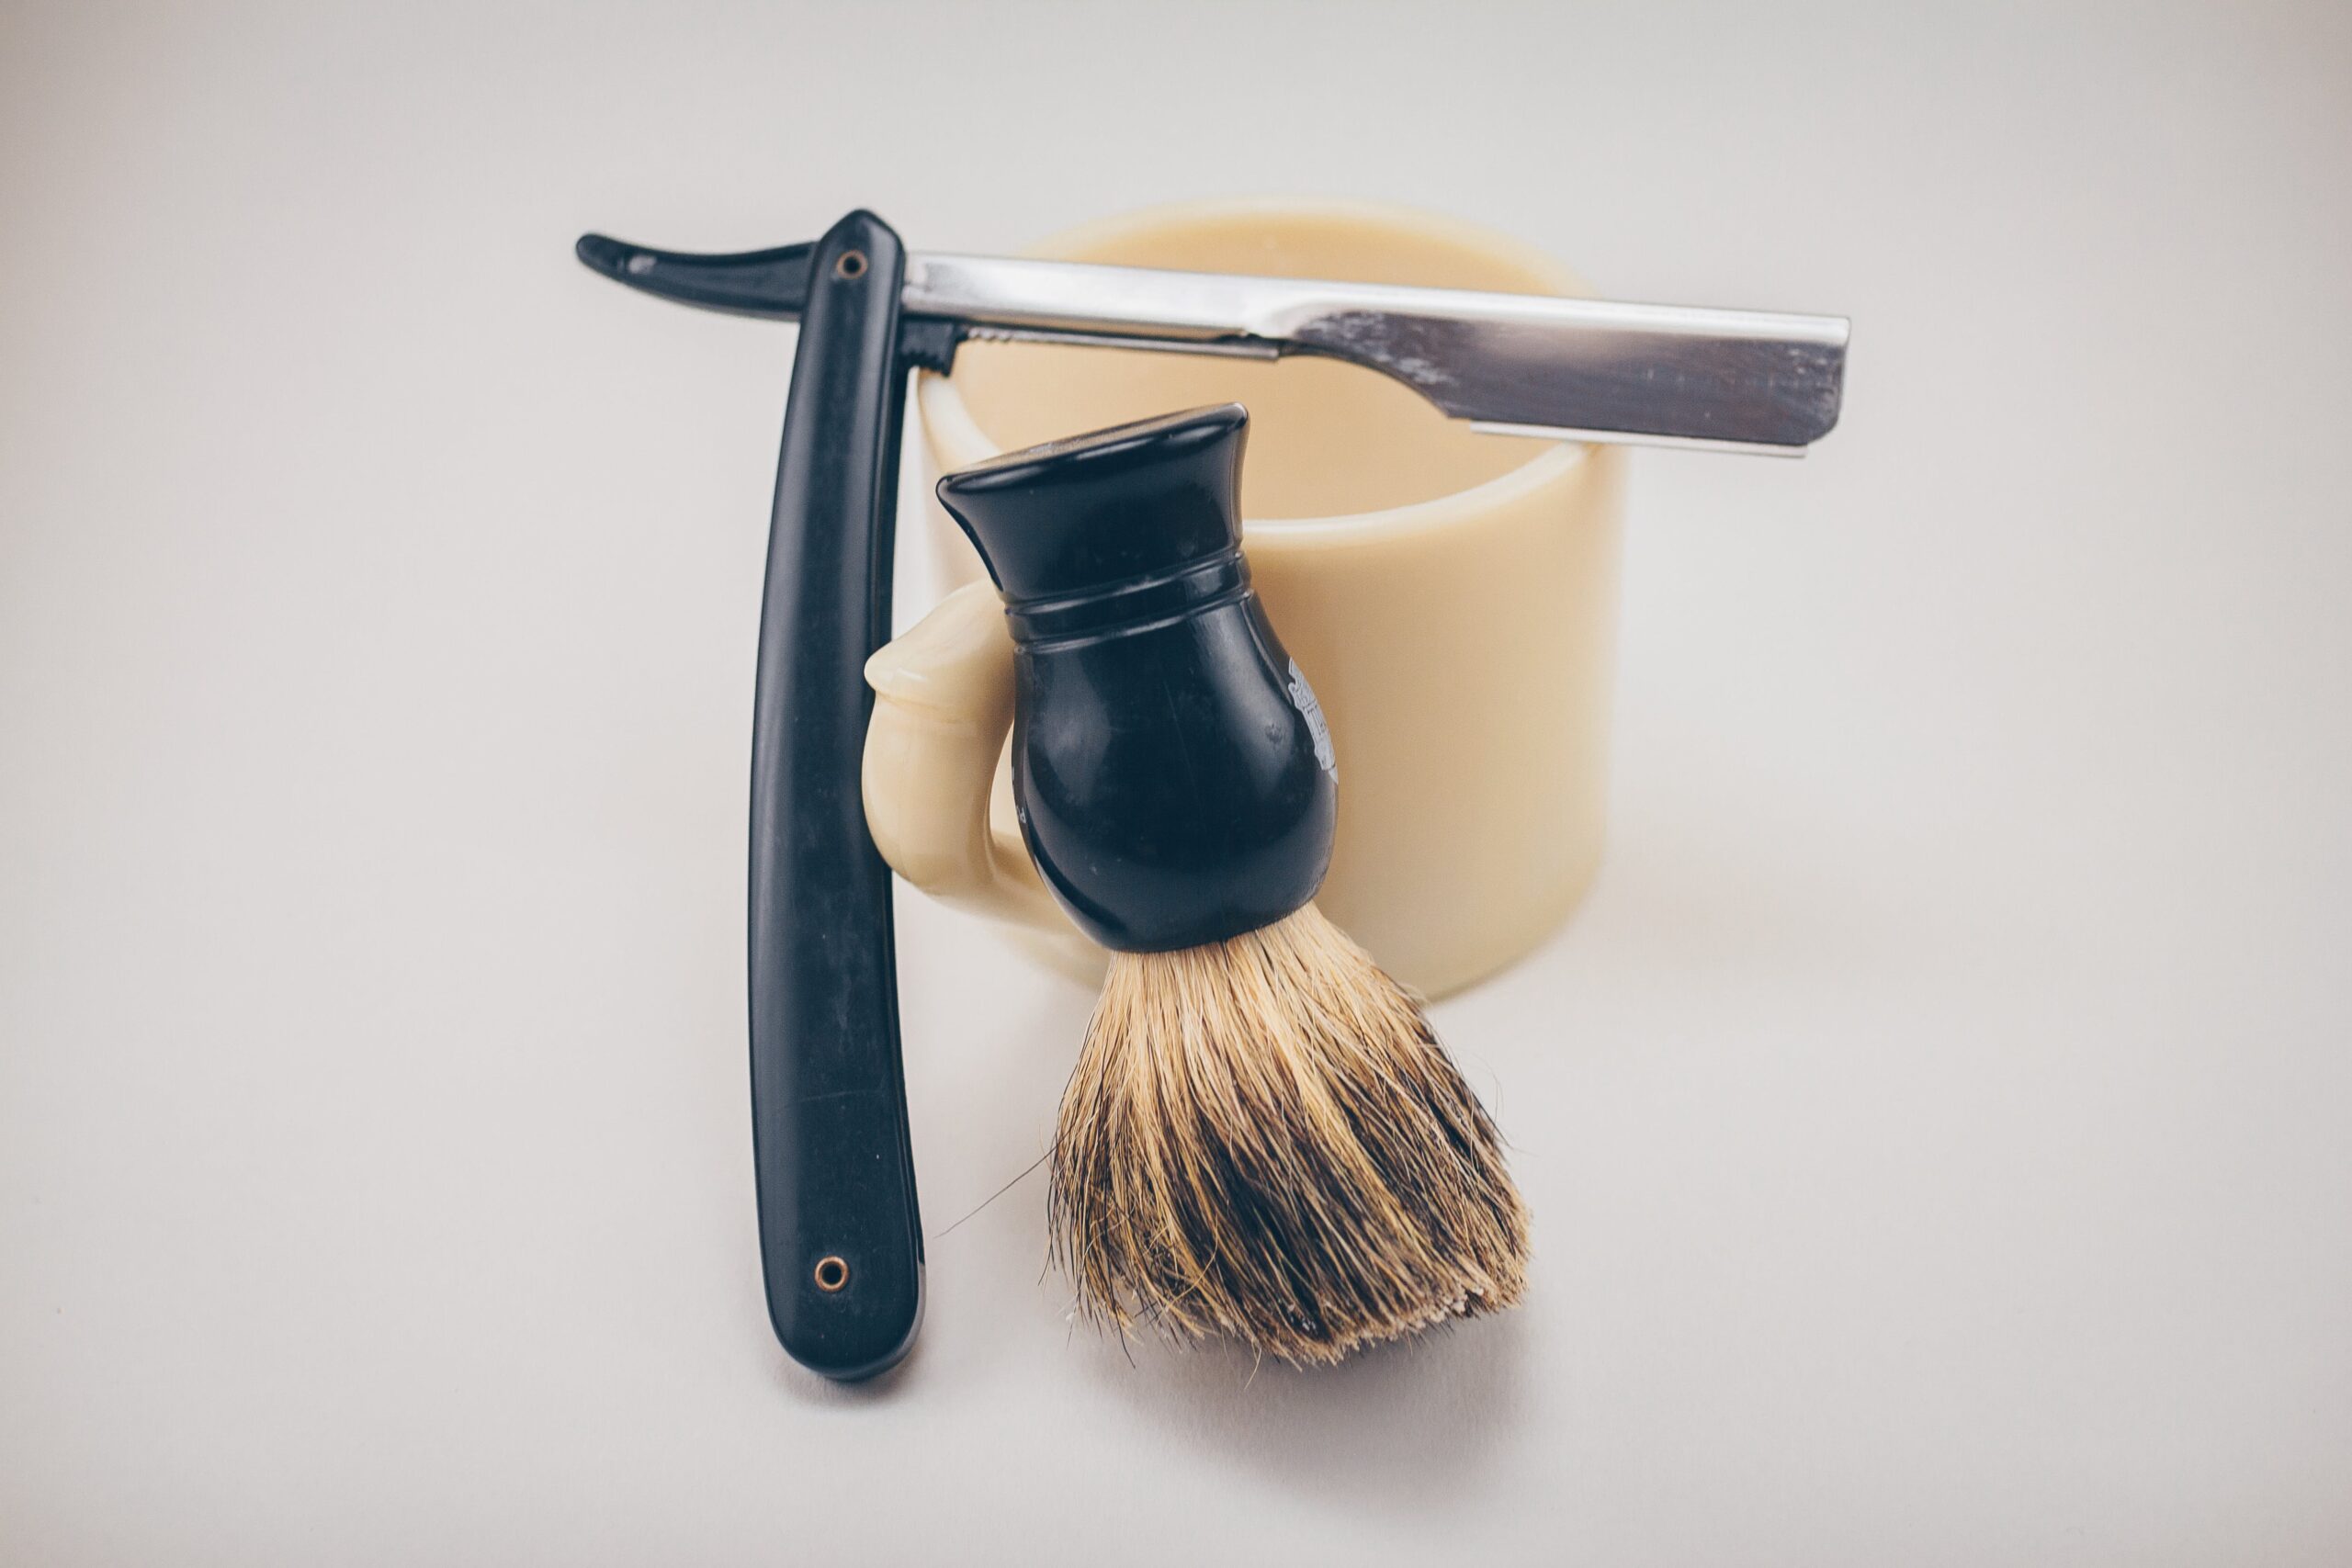 How to Clean a Razor: A Complete Guide with FAQs